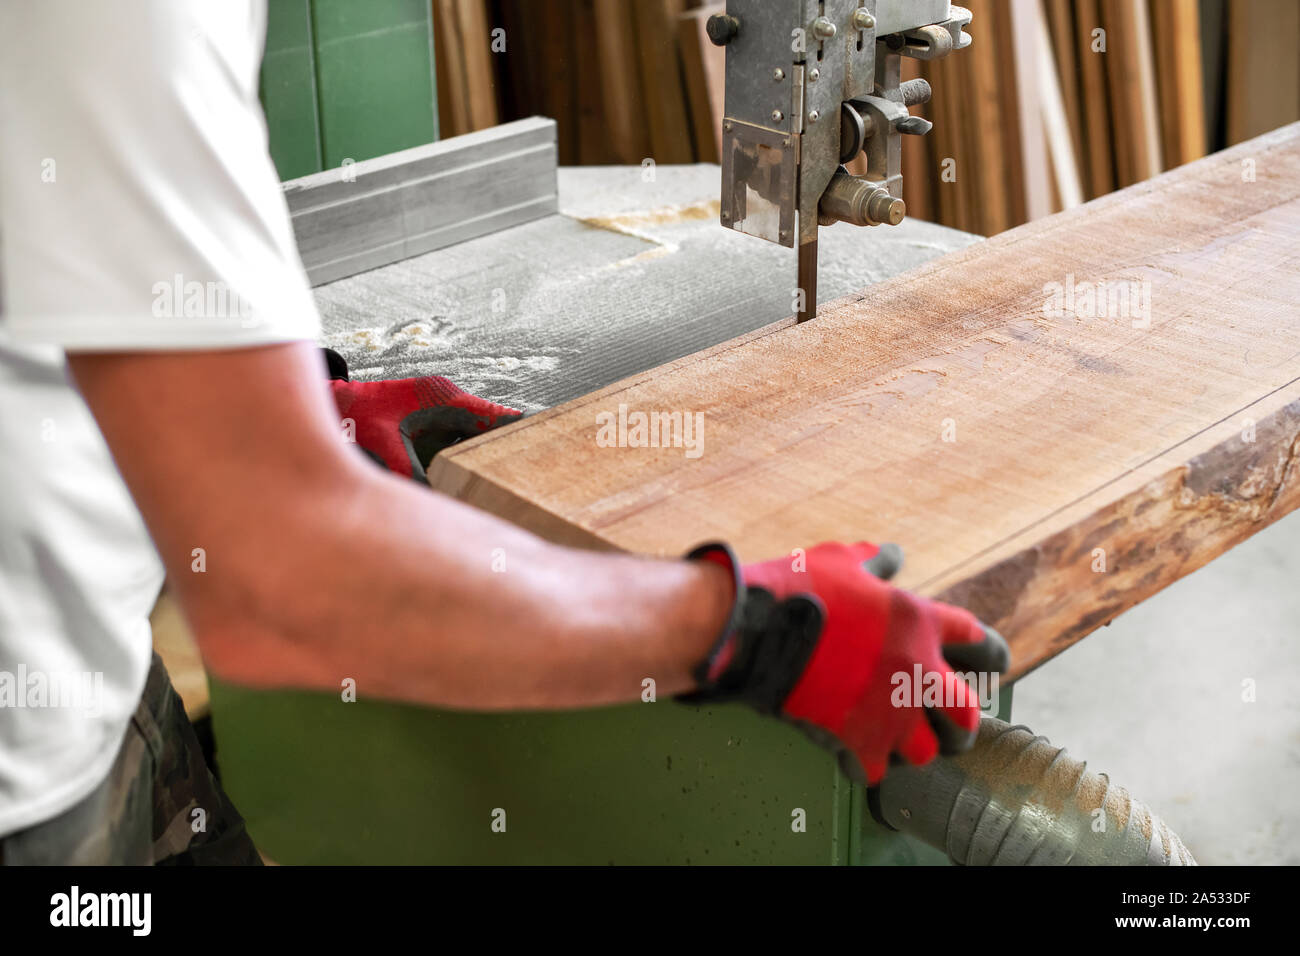 Carpenter cutting a wooden plank on a band saw guiding it with his hands with selective focus to the blade in a woodworking workshop in a close up on Stock Photo